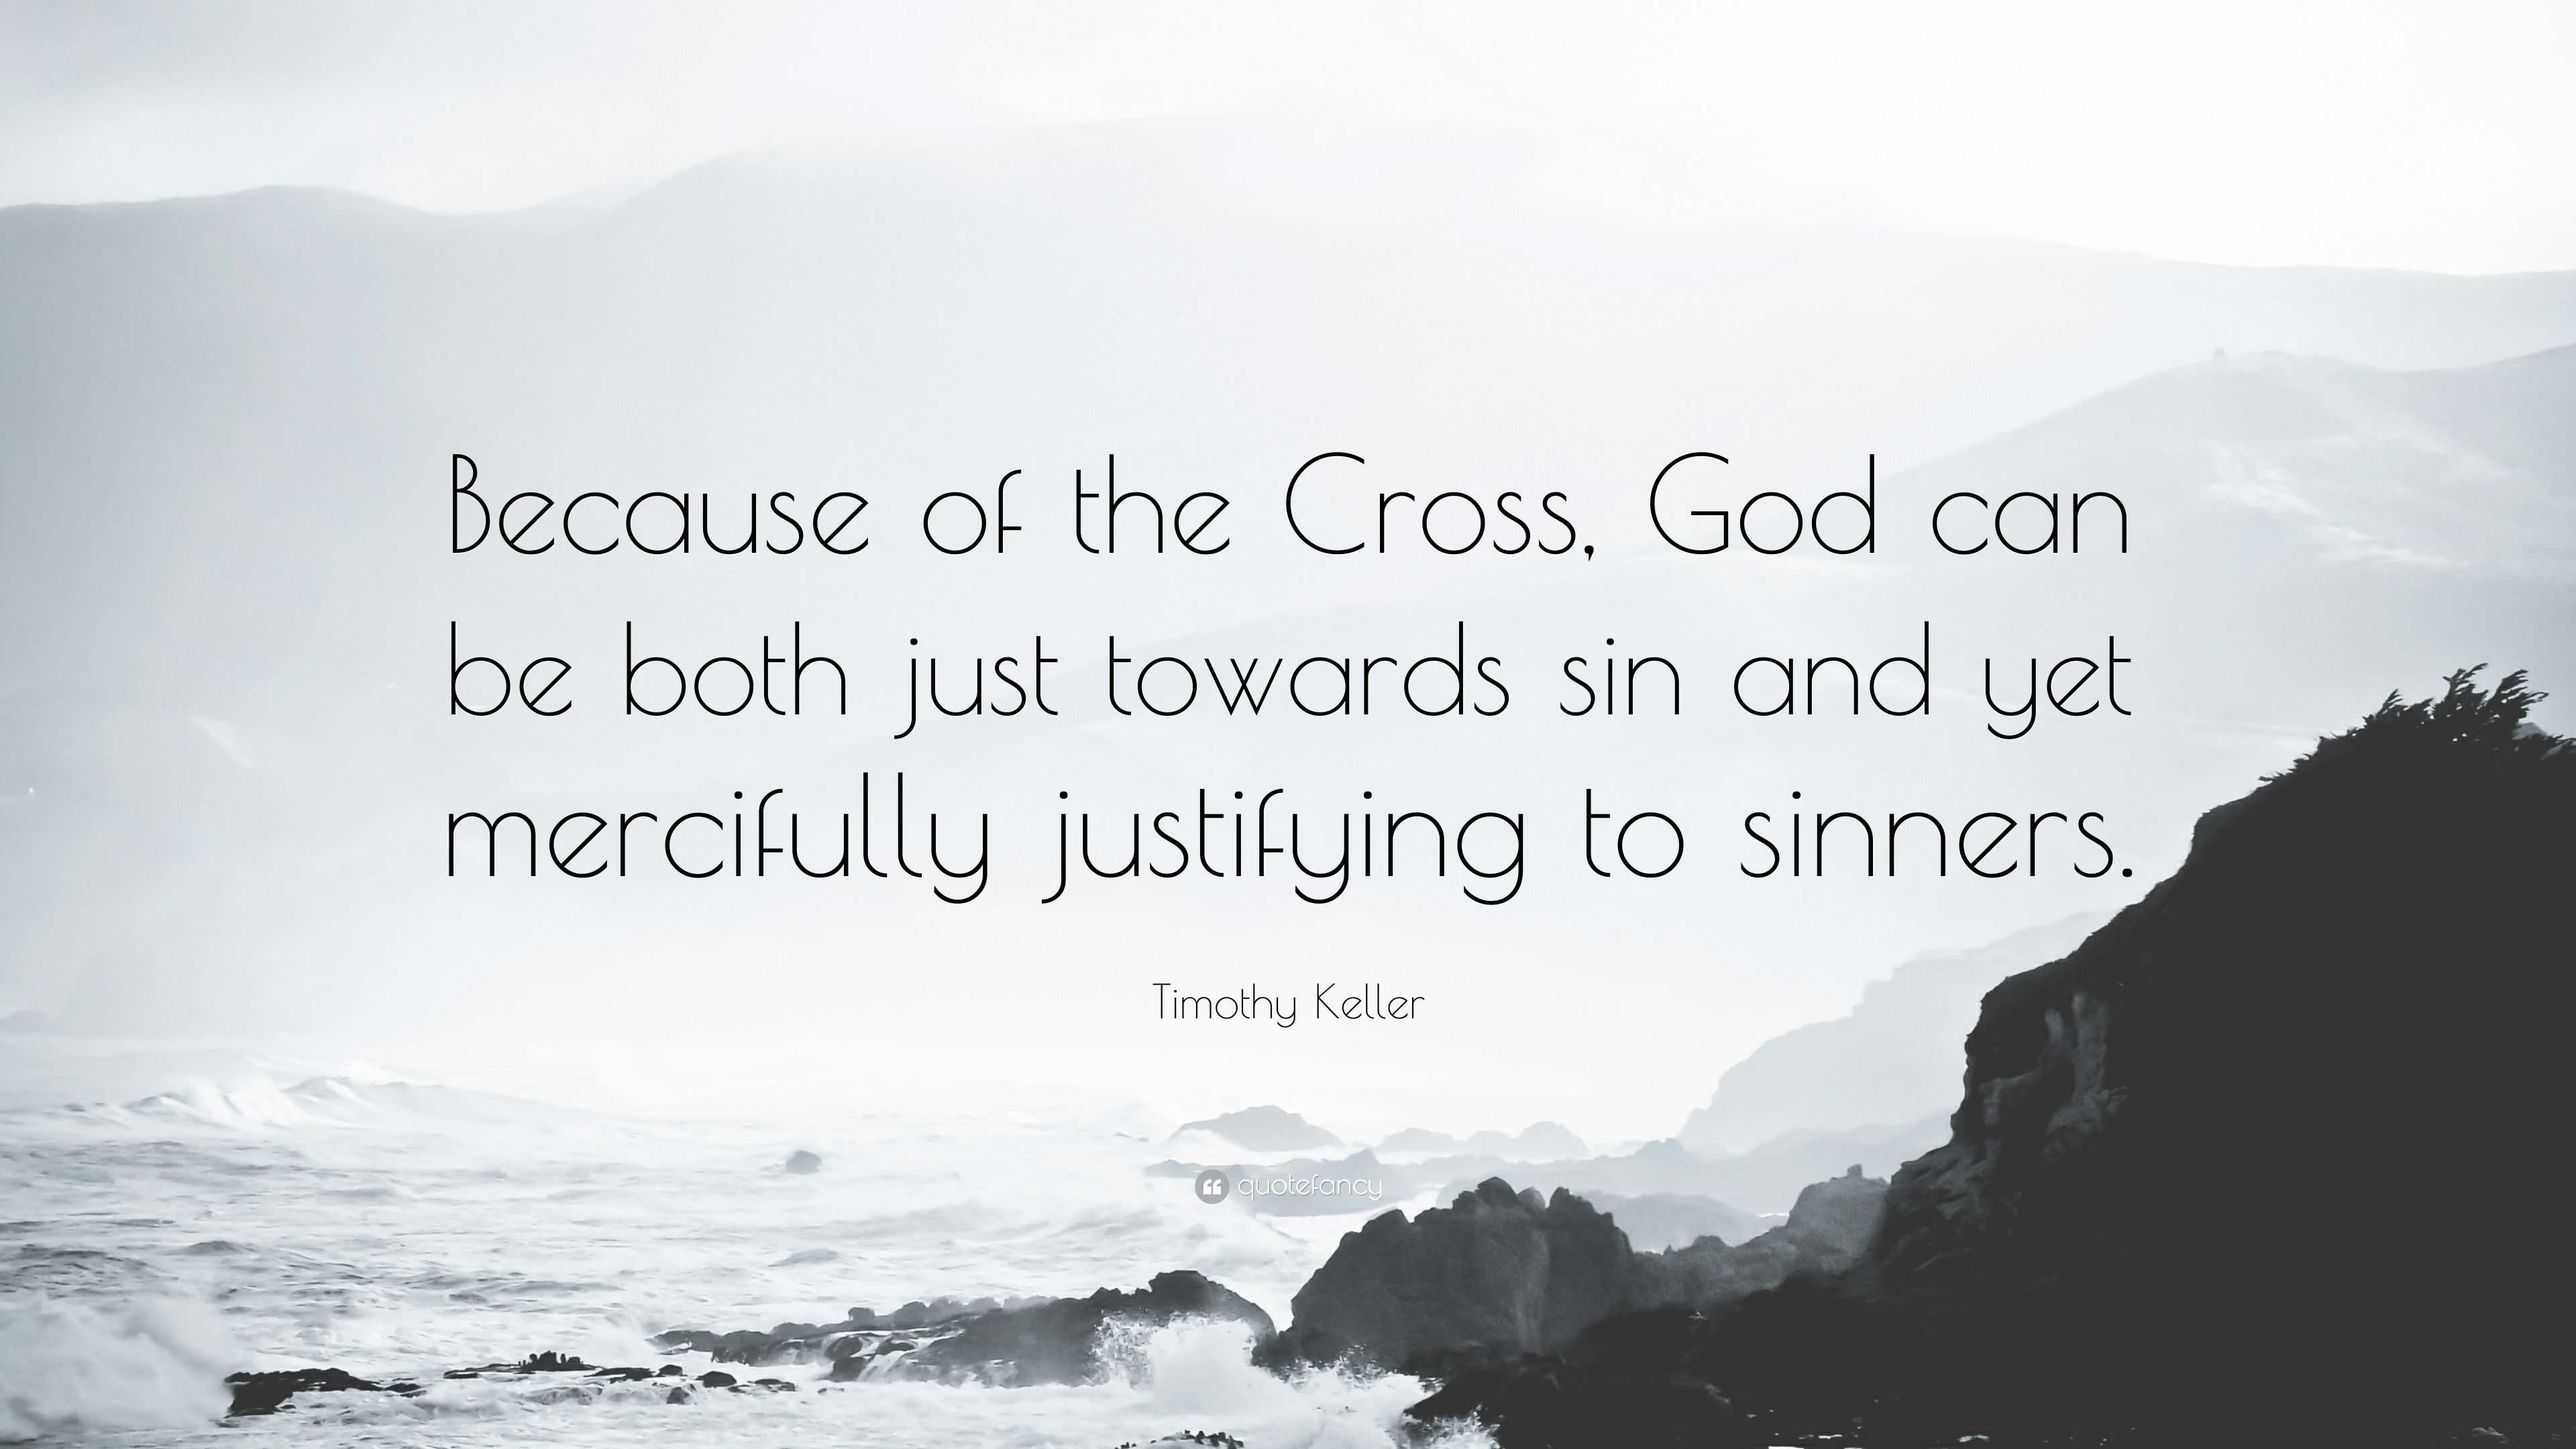 Timothy Keller Quote: “Because of the Cross